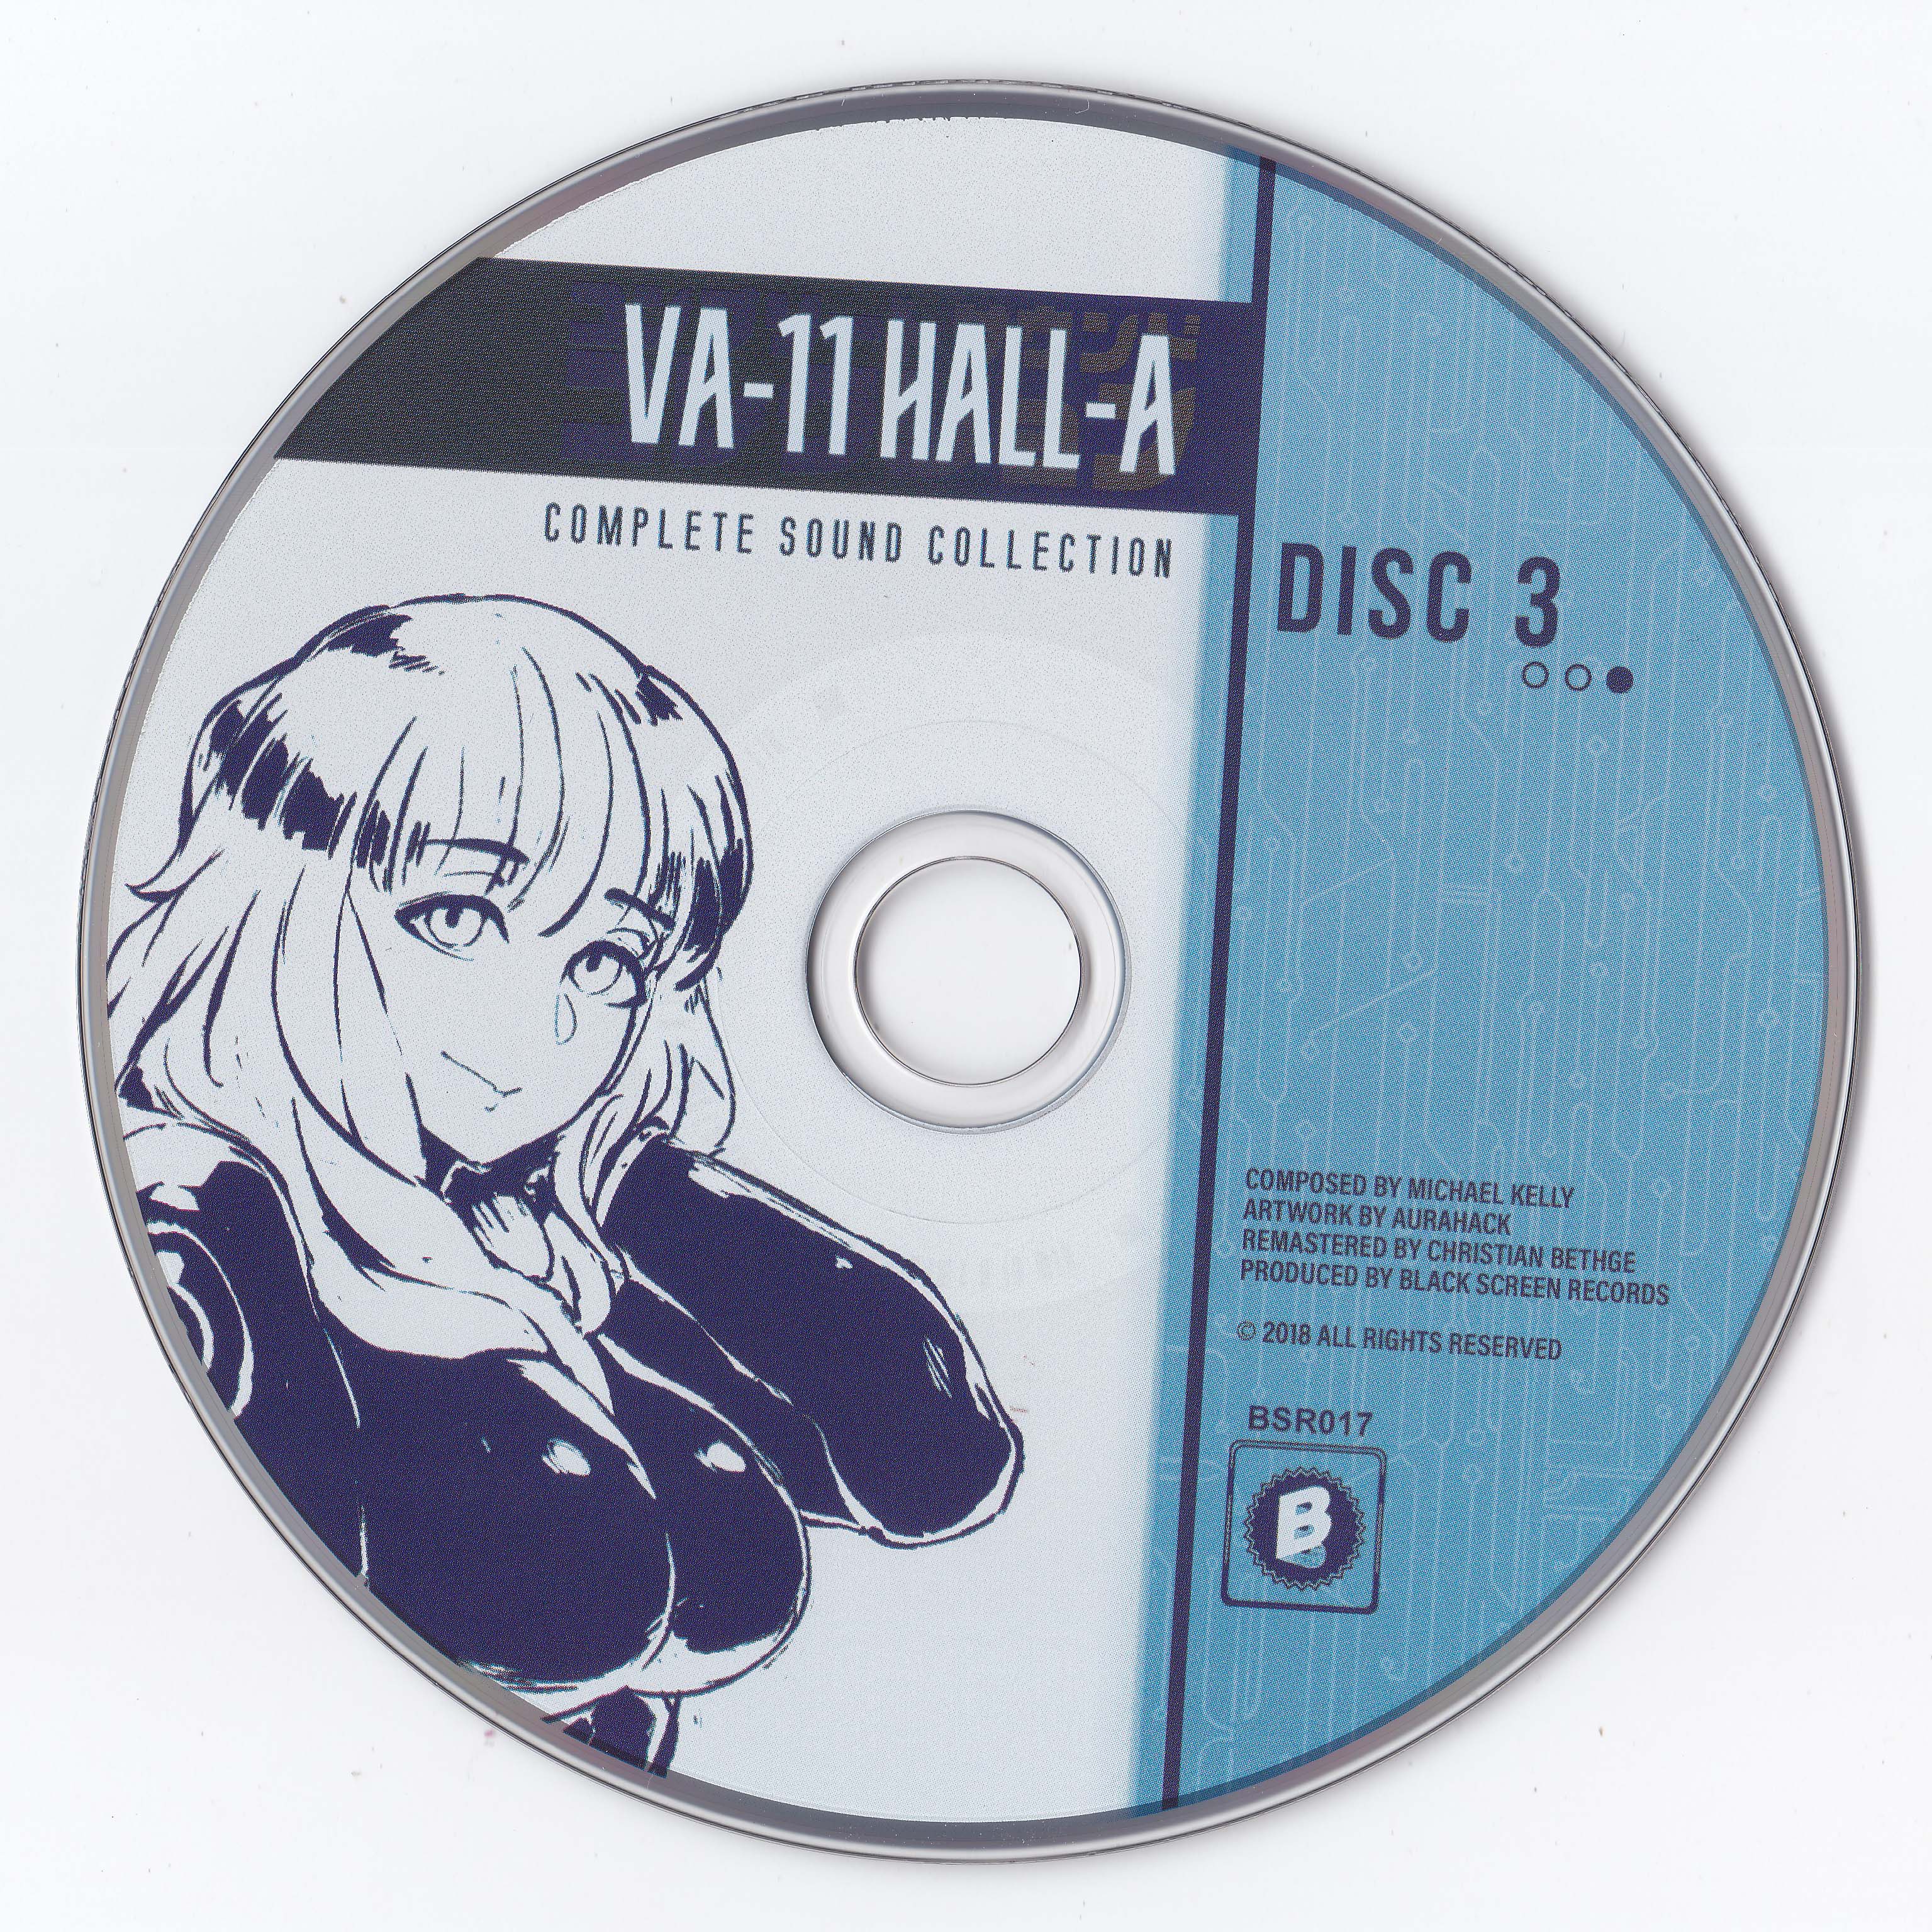 Sound collection. Va-11 Hall-a: complete Sound collection. Sounds collection. Va-11 Hall-a complete Soundtrack collection. Va-11 Hall-a complete Sound collection hq Cover.